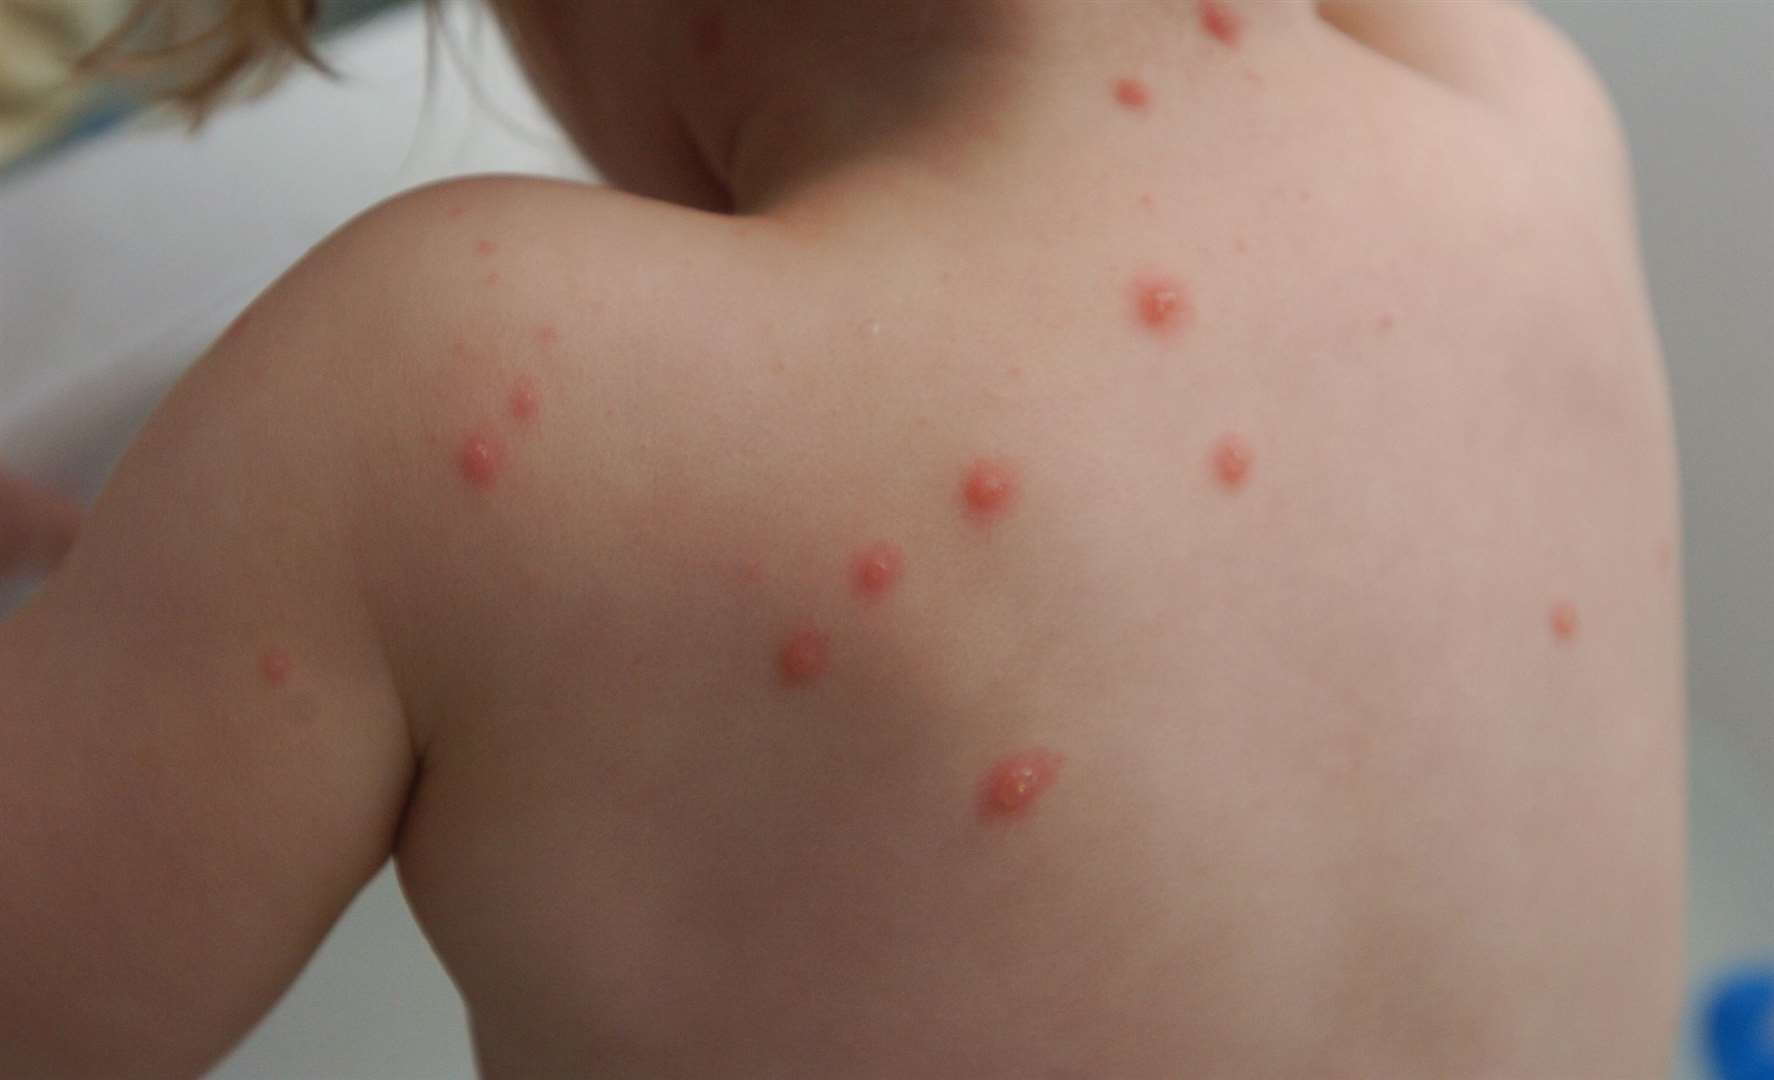 Most people catch chicken pox as a child, says the NHS